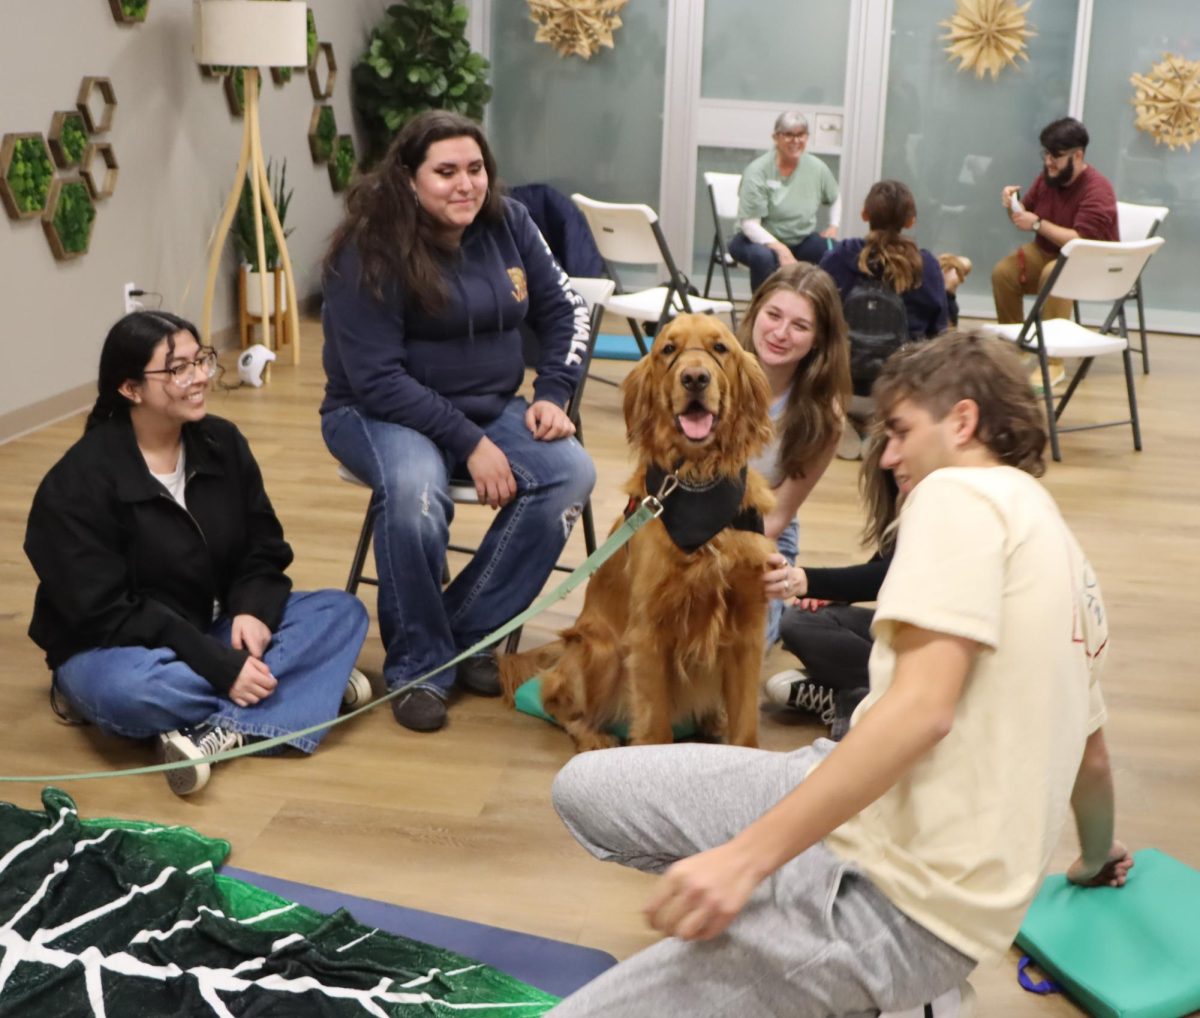 Tommy, a 3 year old Golden Retriever, interacts with students at The Well. Taken by Toby Neal on Feb. 28. 